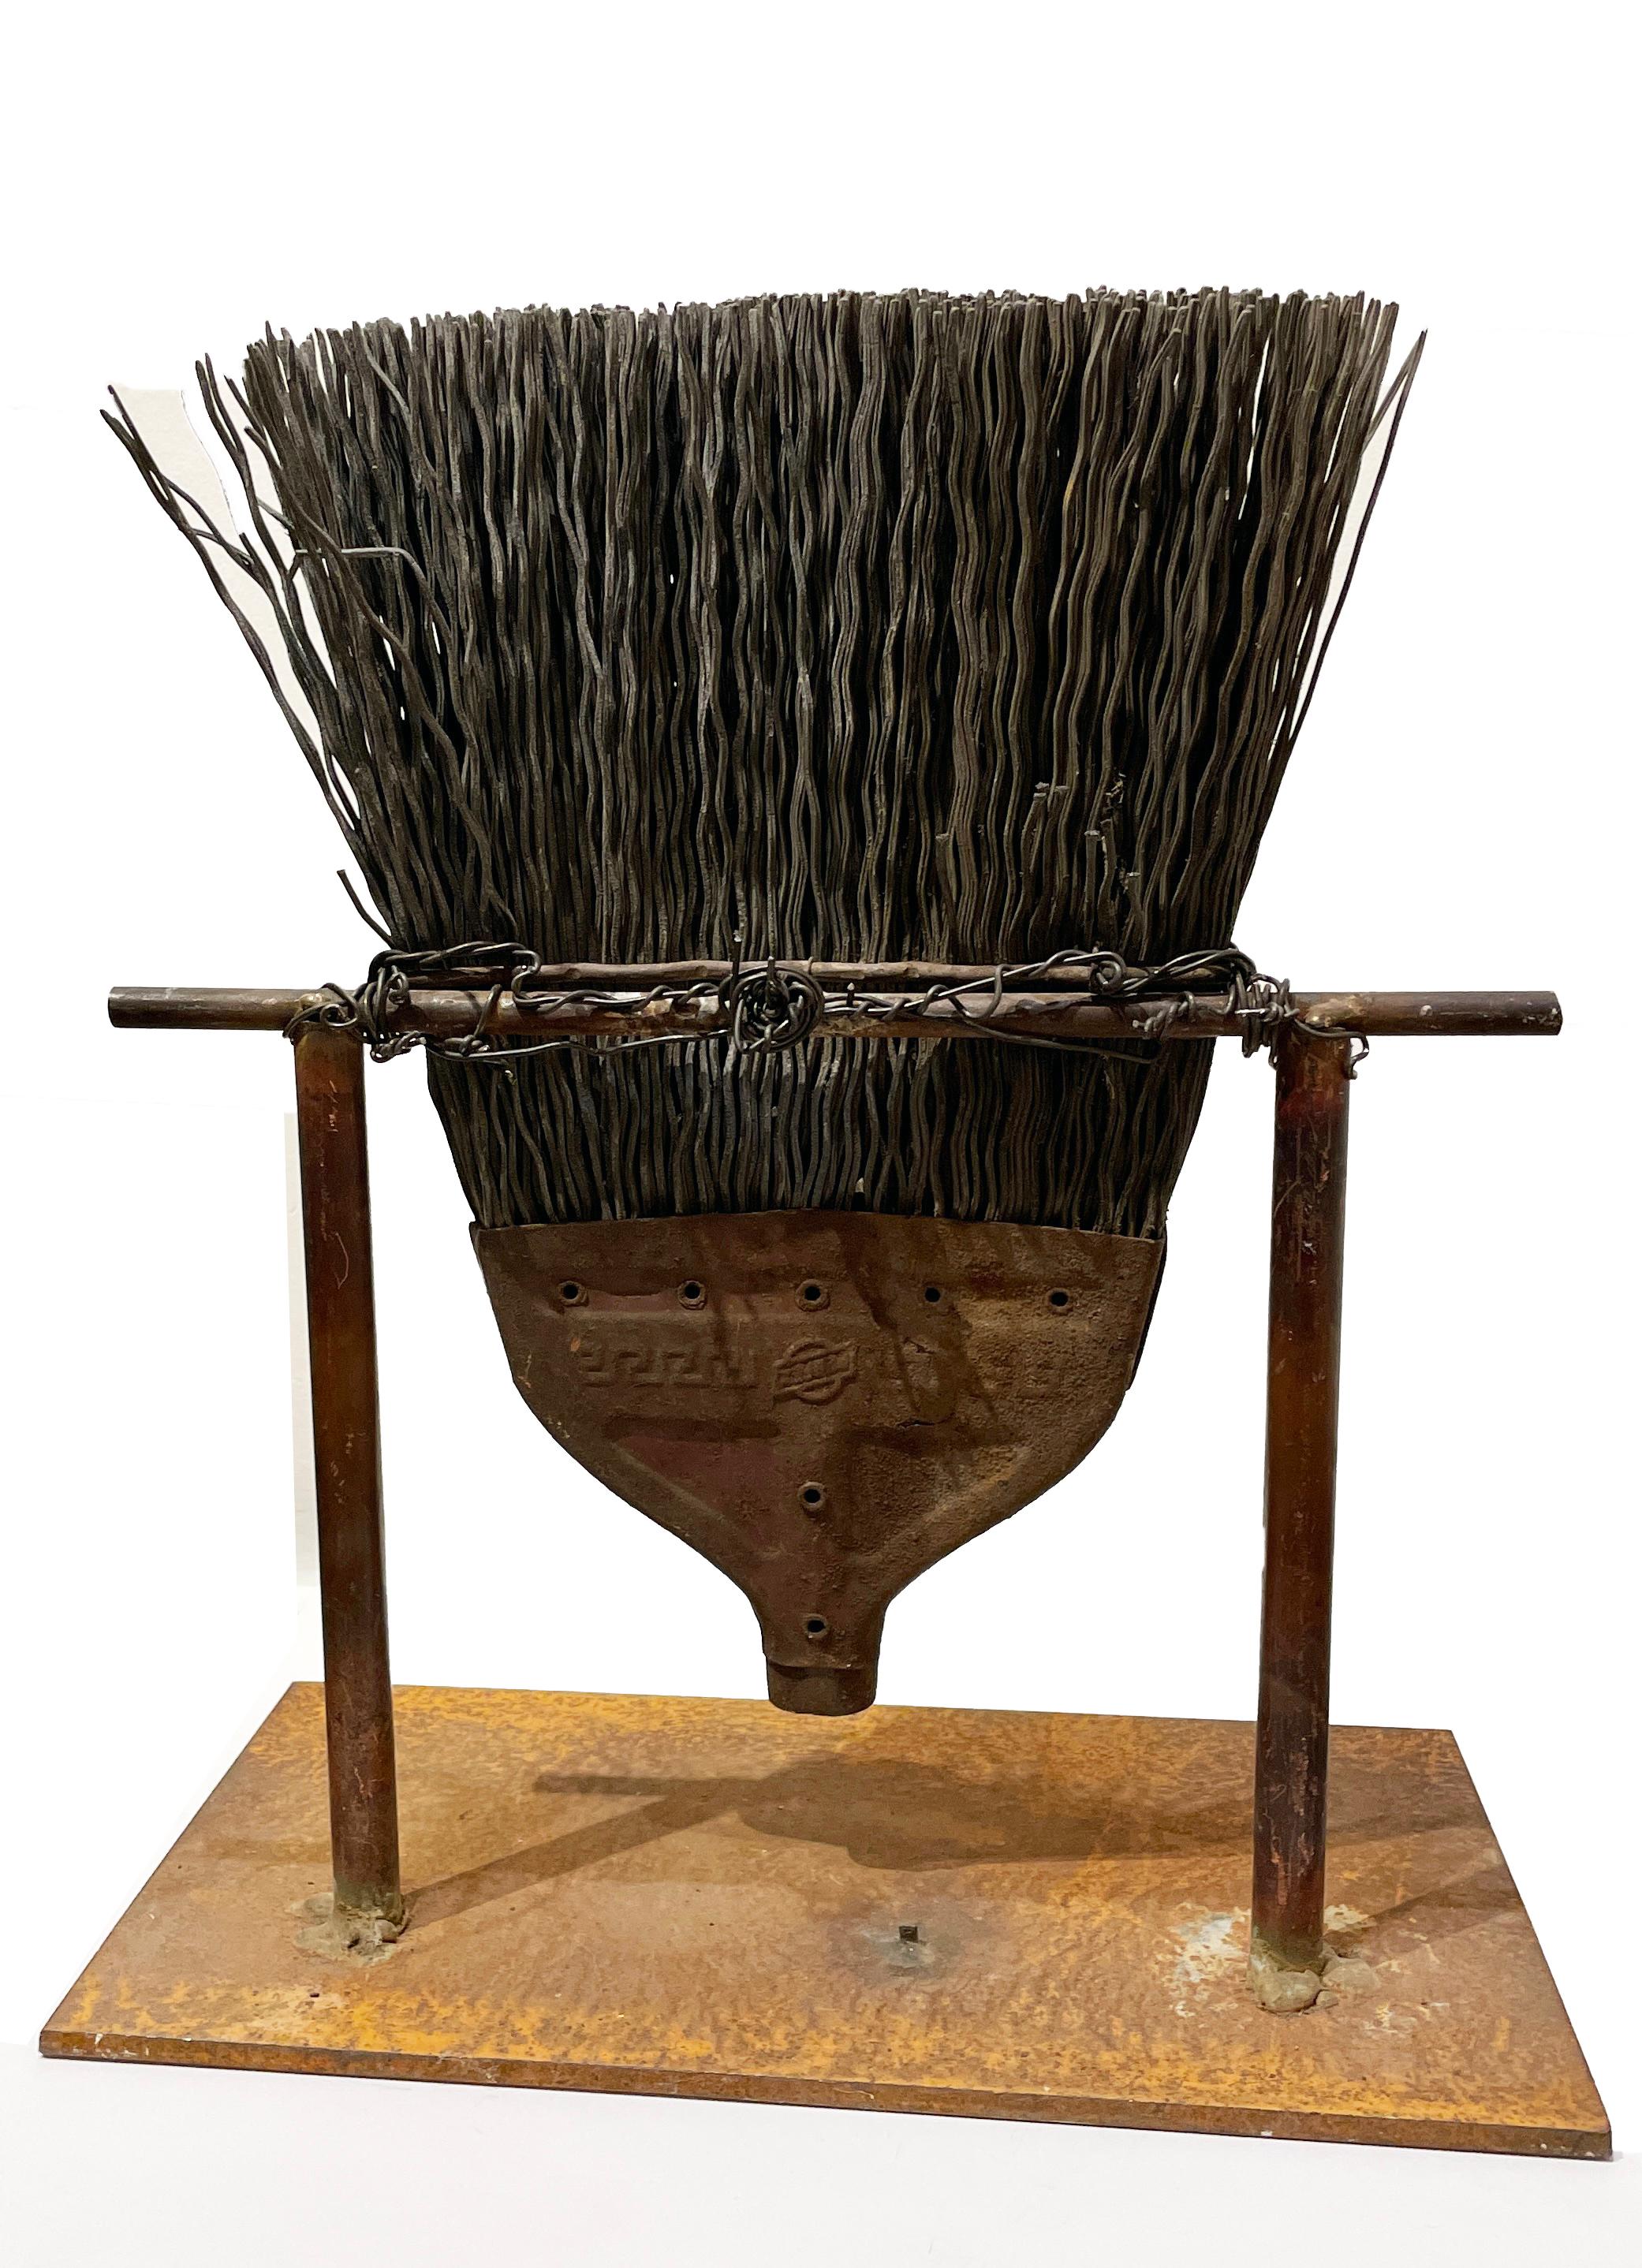 Order of the Ages - Found Object Sculpture with Heavy Bristle Brush & Figure - Beige Abstract Sculpture by Rick Farrell